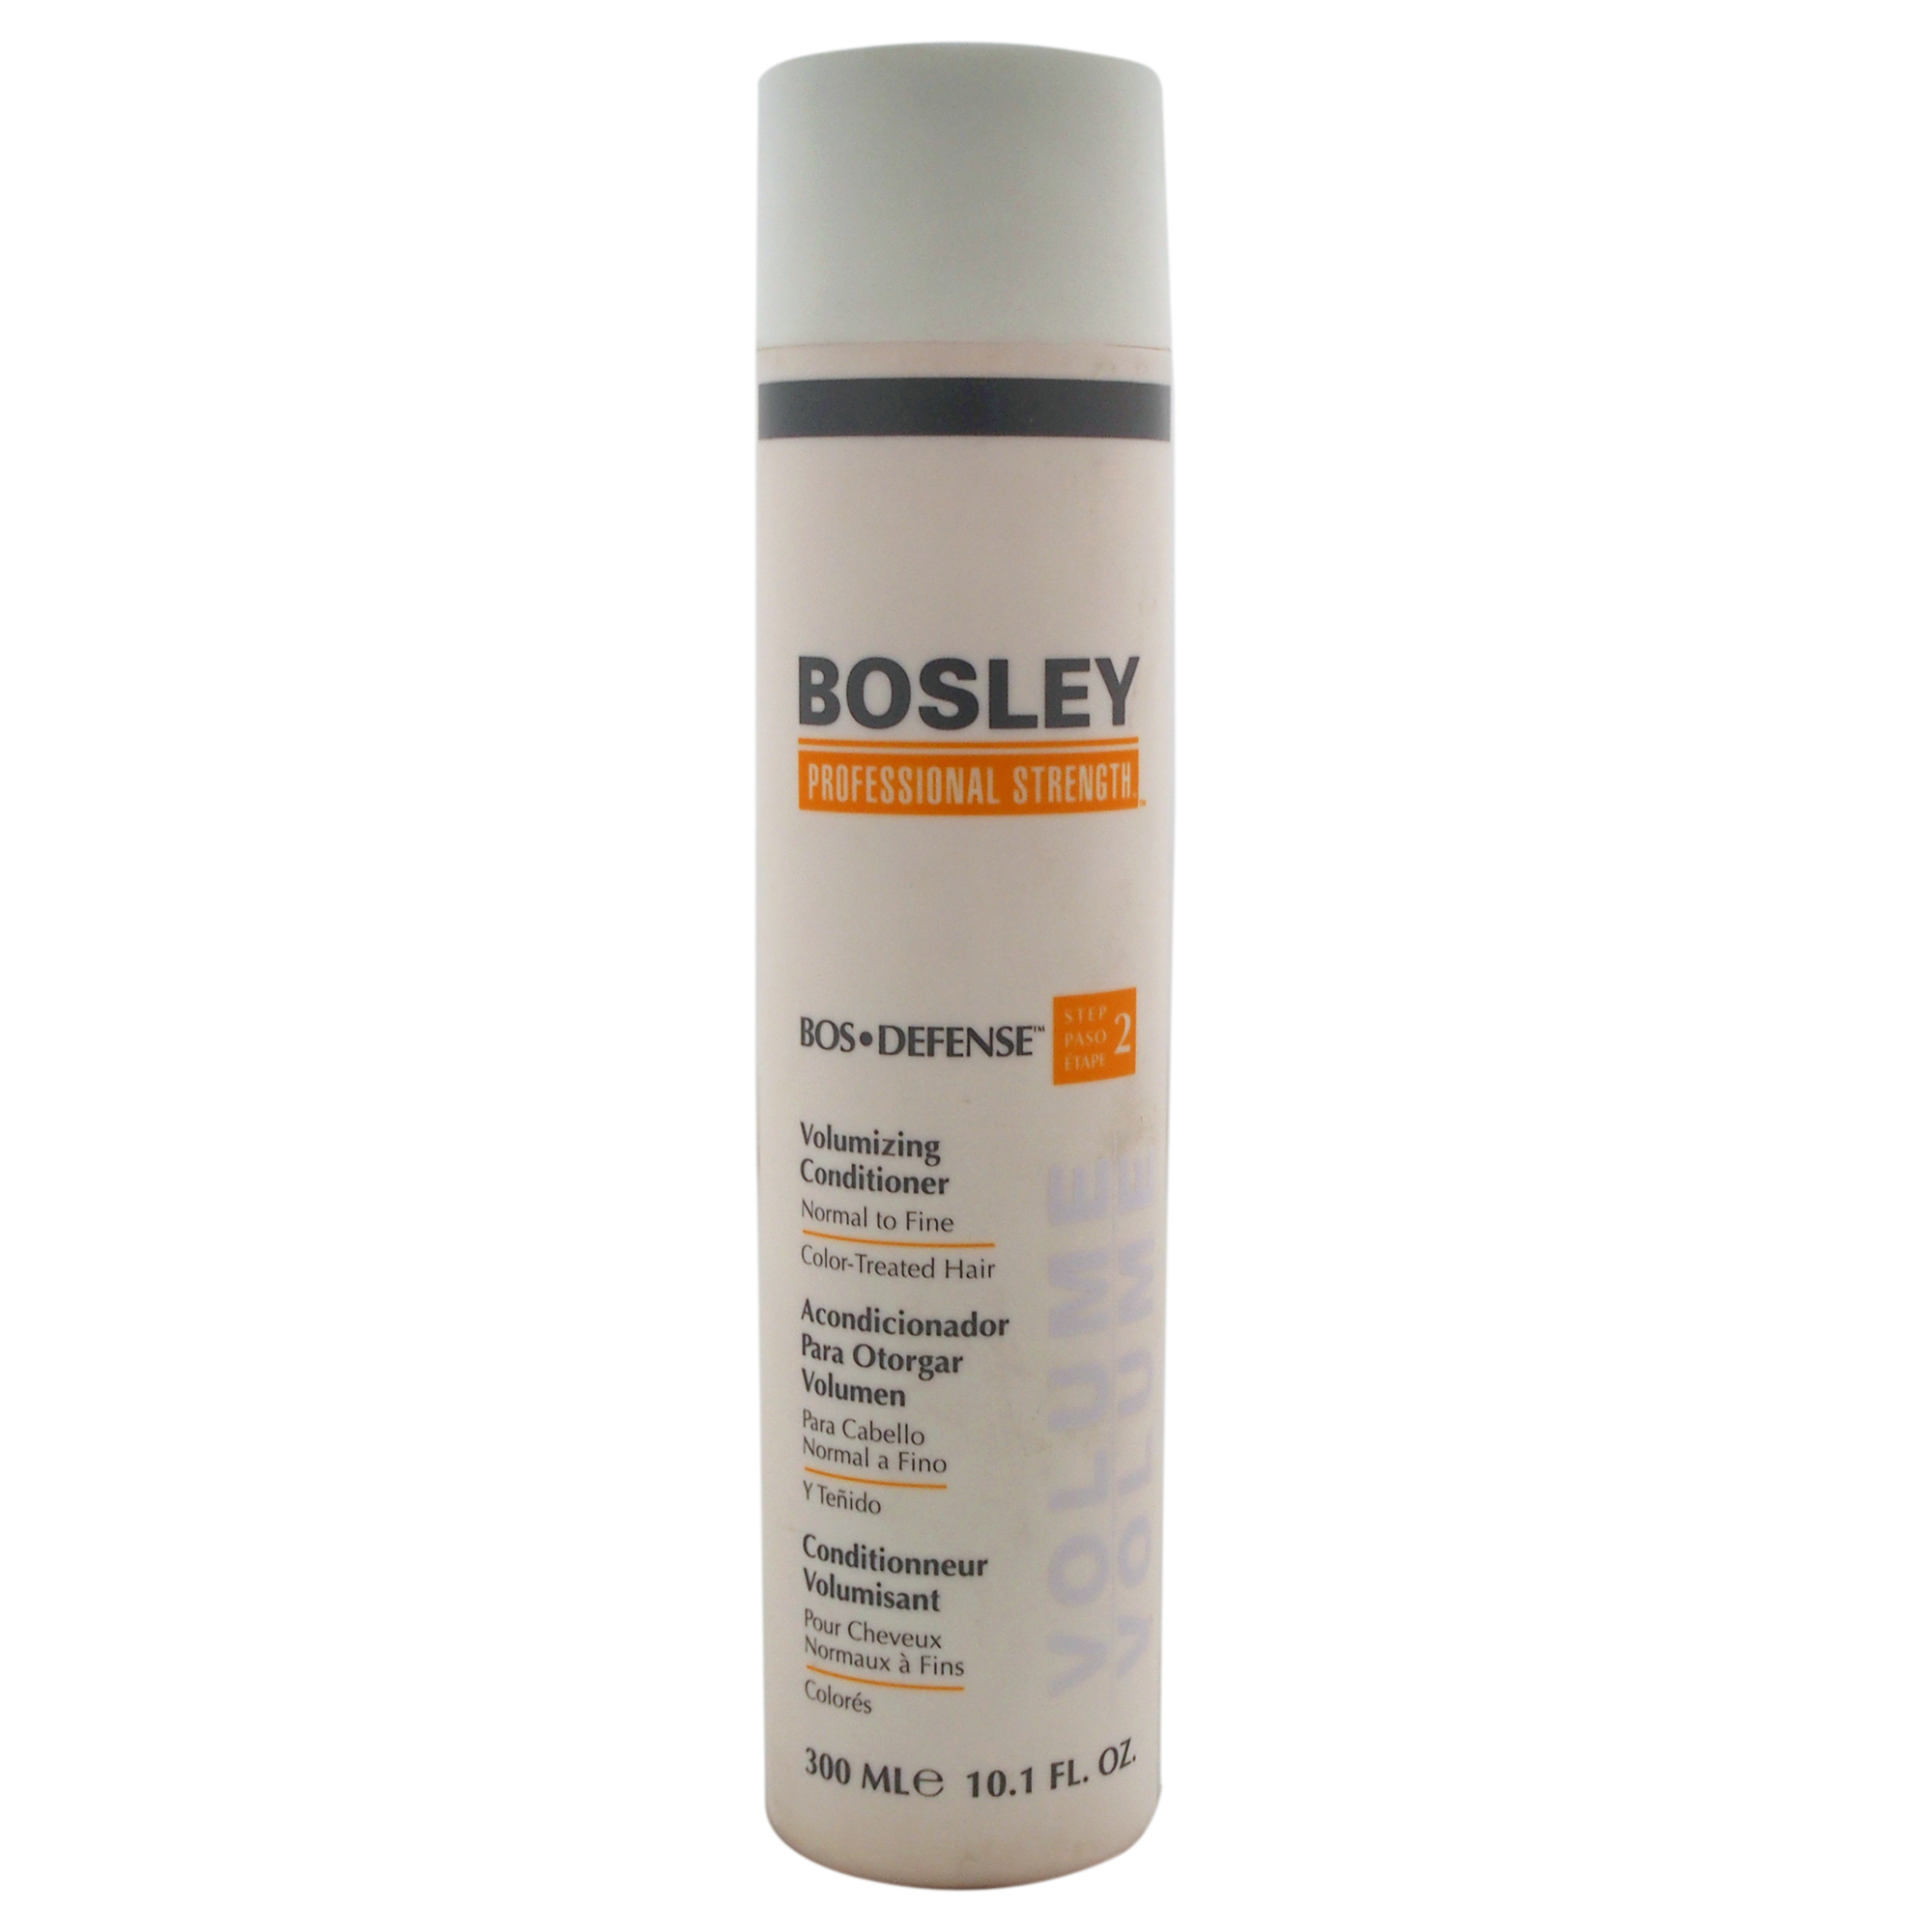 BOSLEY Bos-Defense Volumizing Conditioner for Normal To Fine Color-Treated Hair